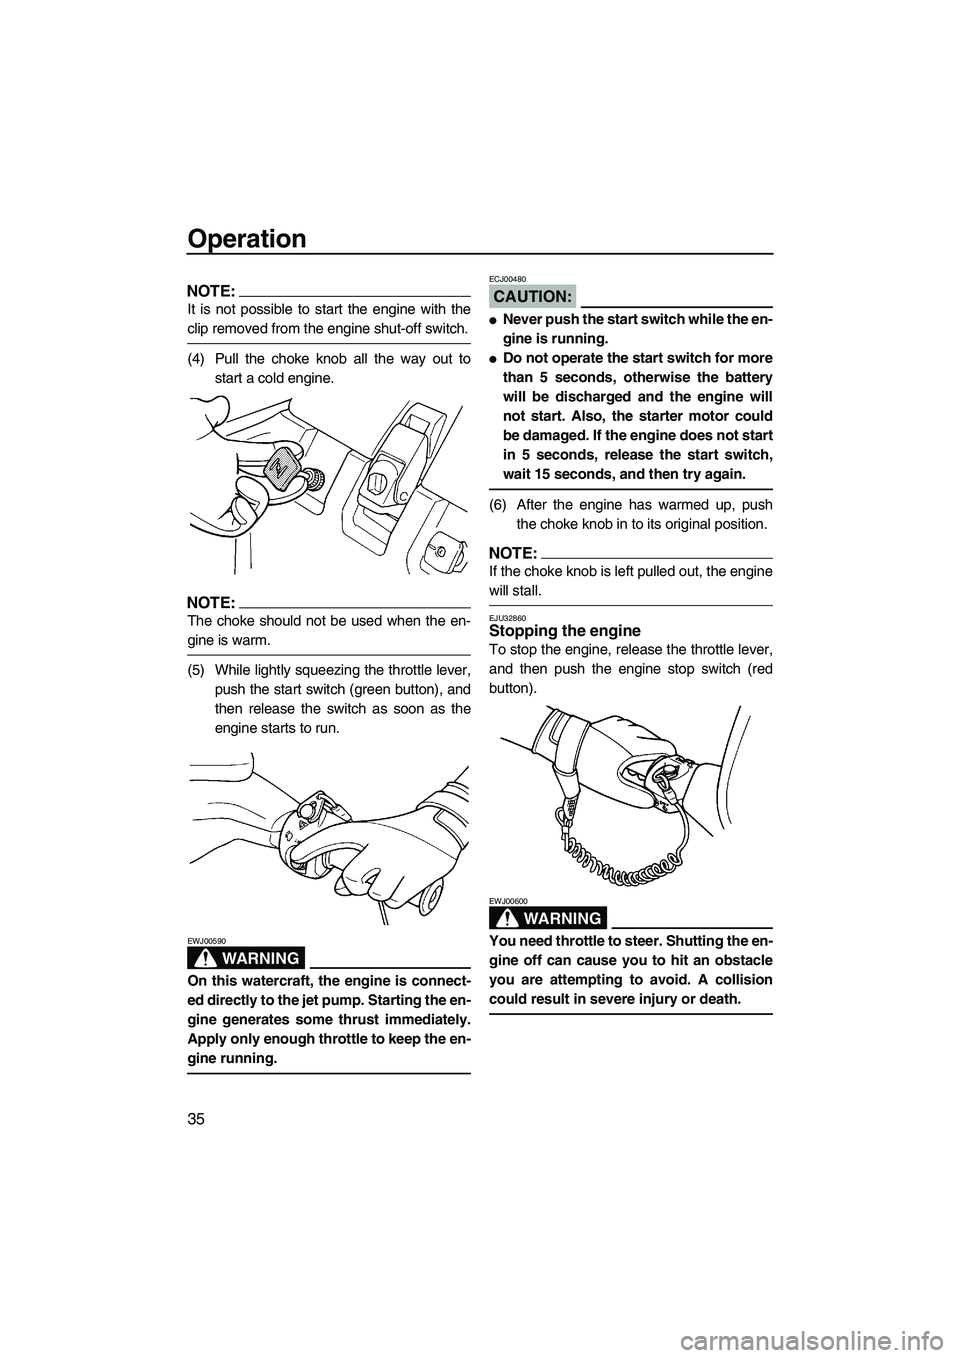 YAMAHA SUPERJET 2007 Service Manual Operation
35
NOTE:
It is not possible to start the engine with the
clip removed from the engine shut-off switch.
(4) Pull the choke knob all the way out to
start a cold engine.
NOTE:
The choke should 